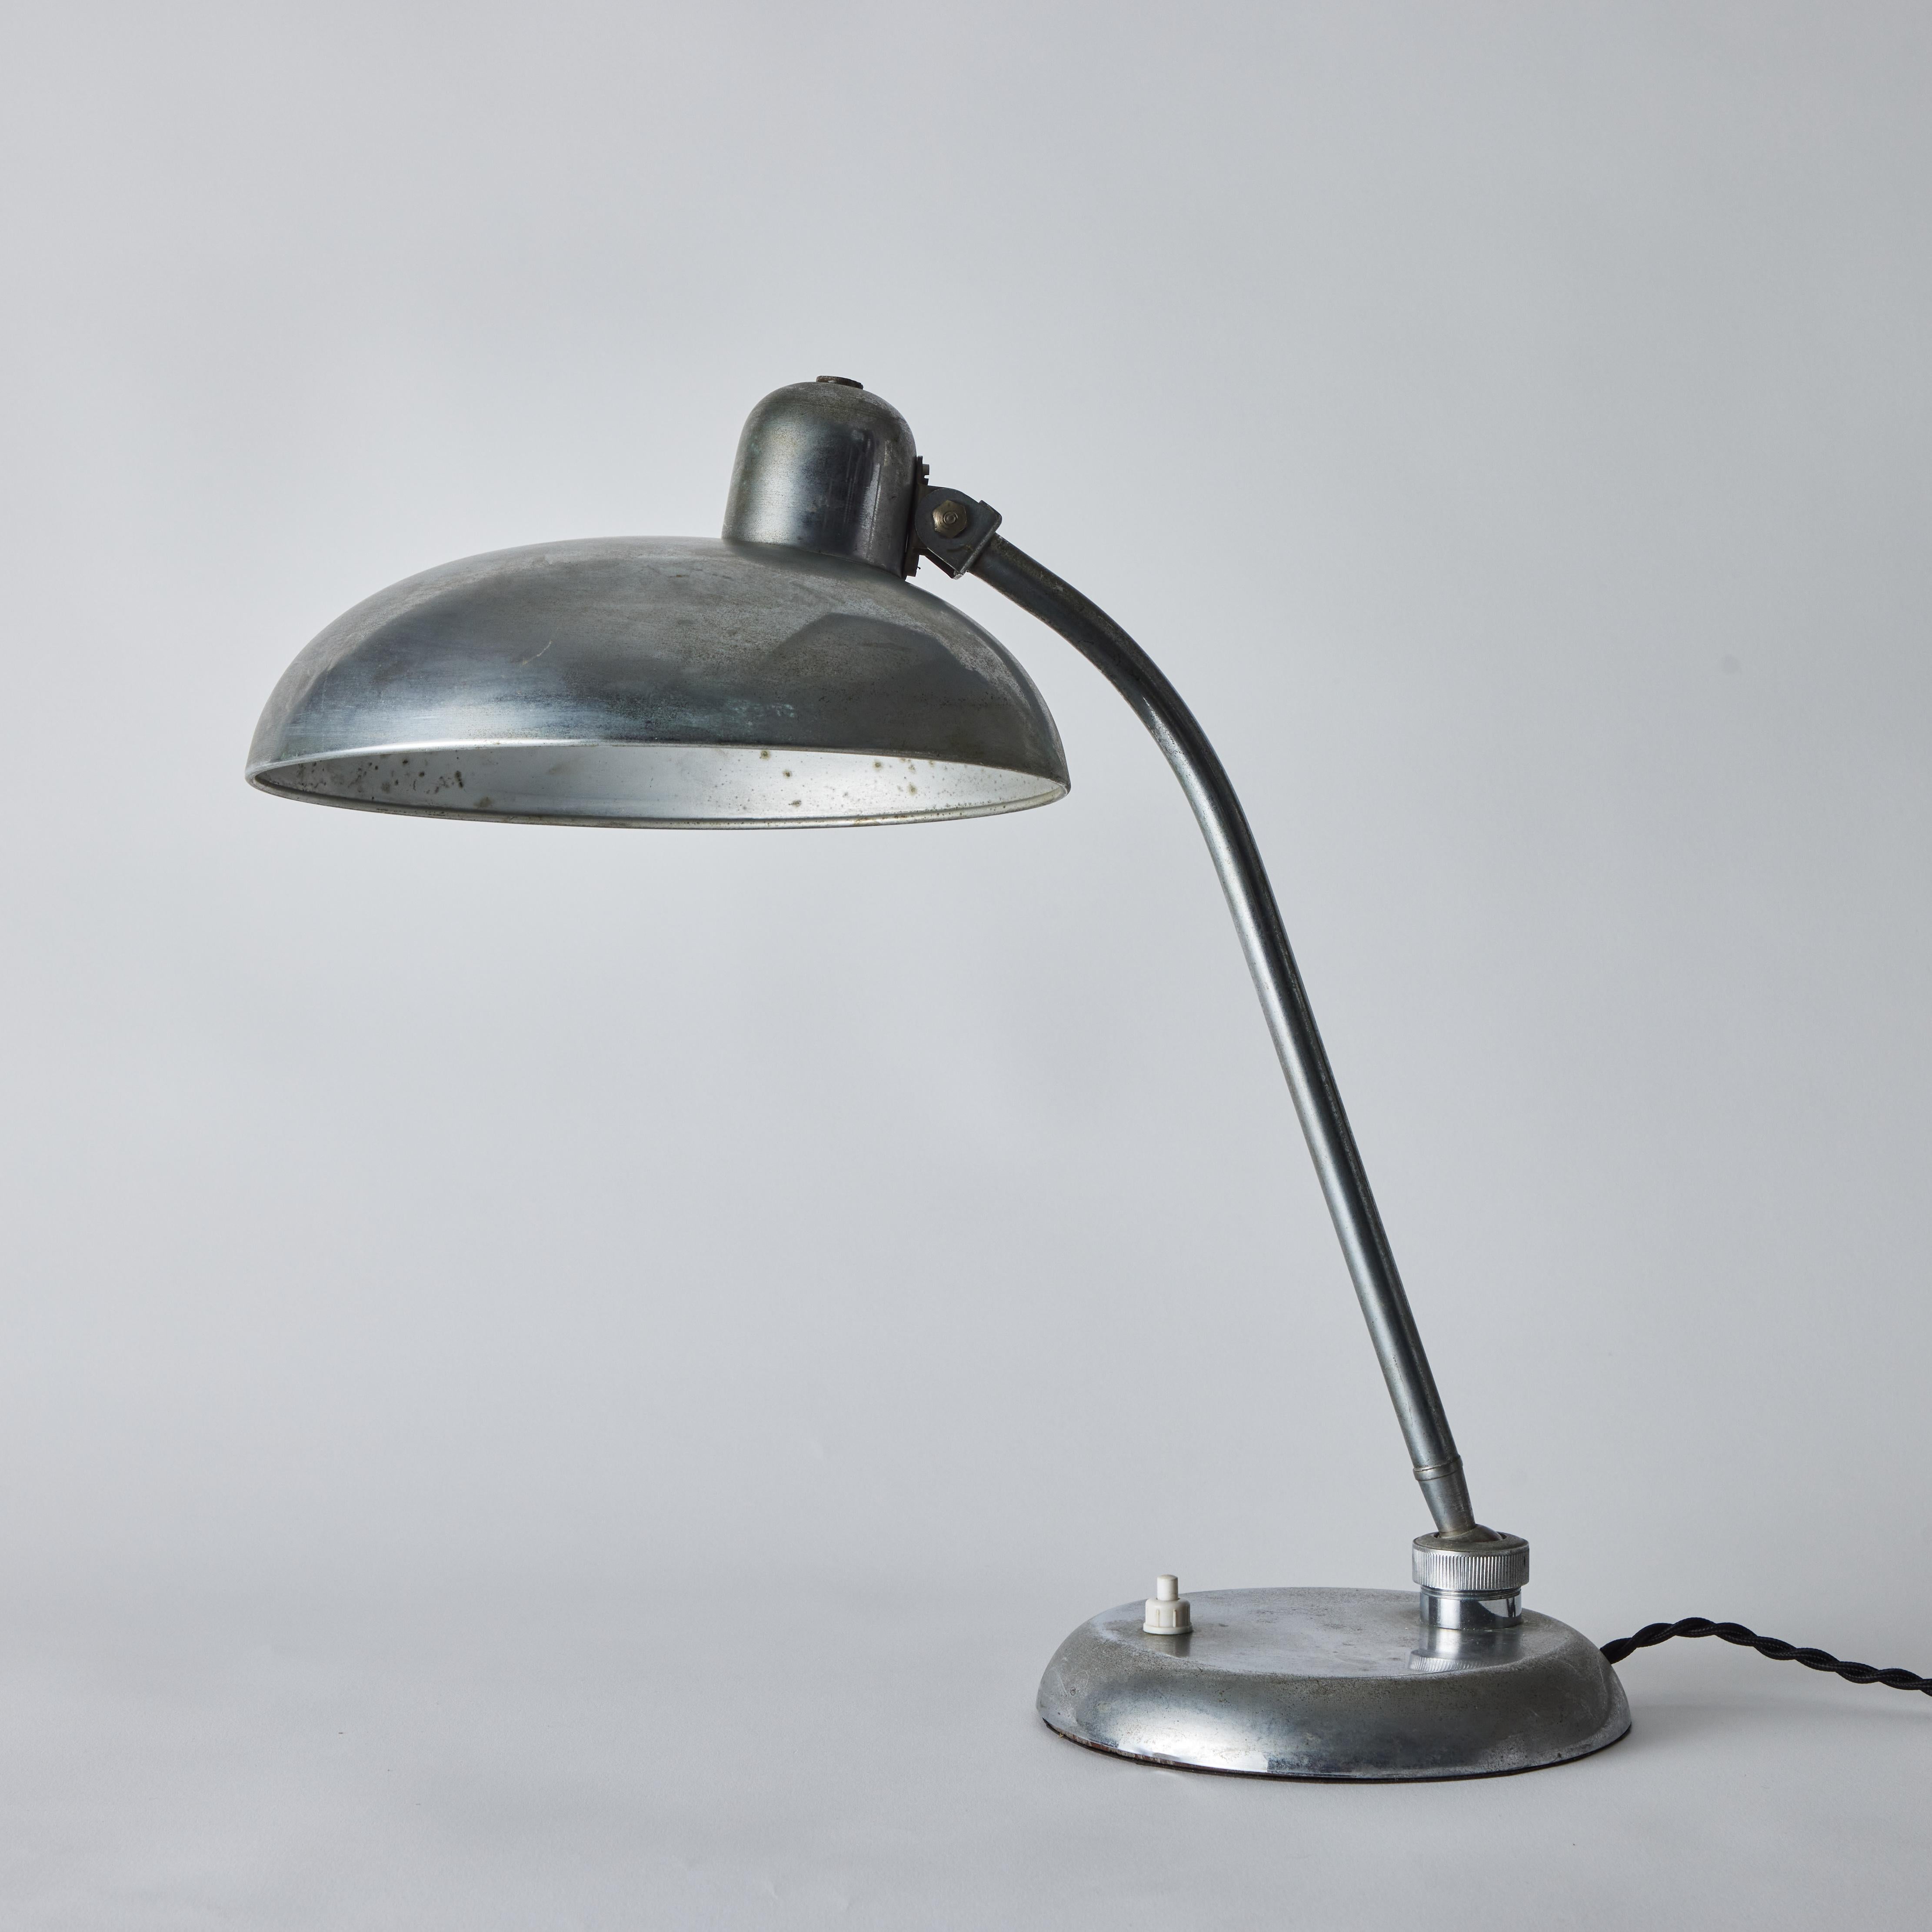 1940s Giovanni Michelucci Patinated Nickel Ministerial Table Lamp for Lariolux For Sale 2